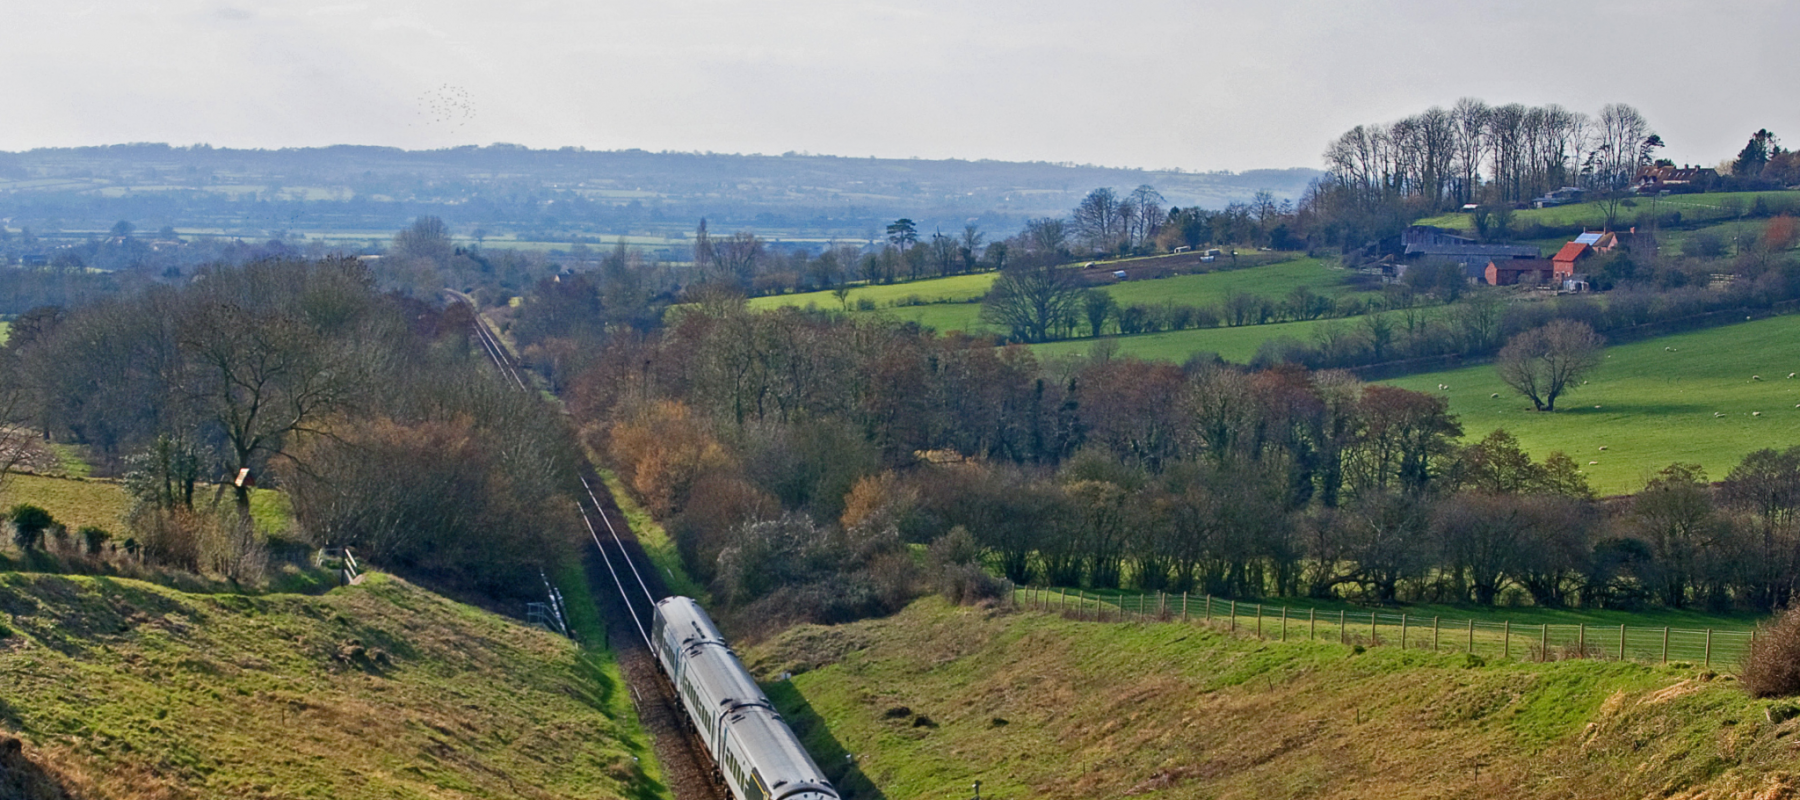 Days out by train along Blackmore Vale Line